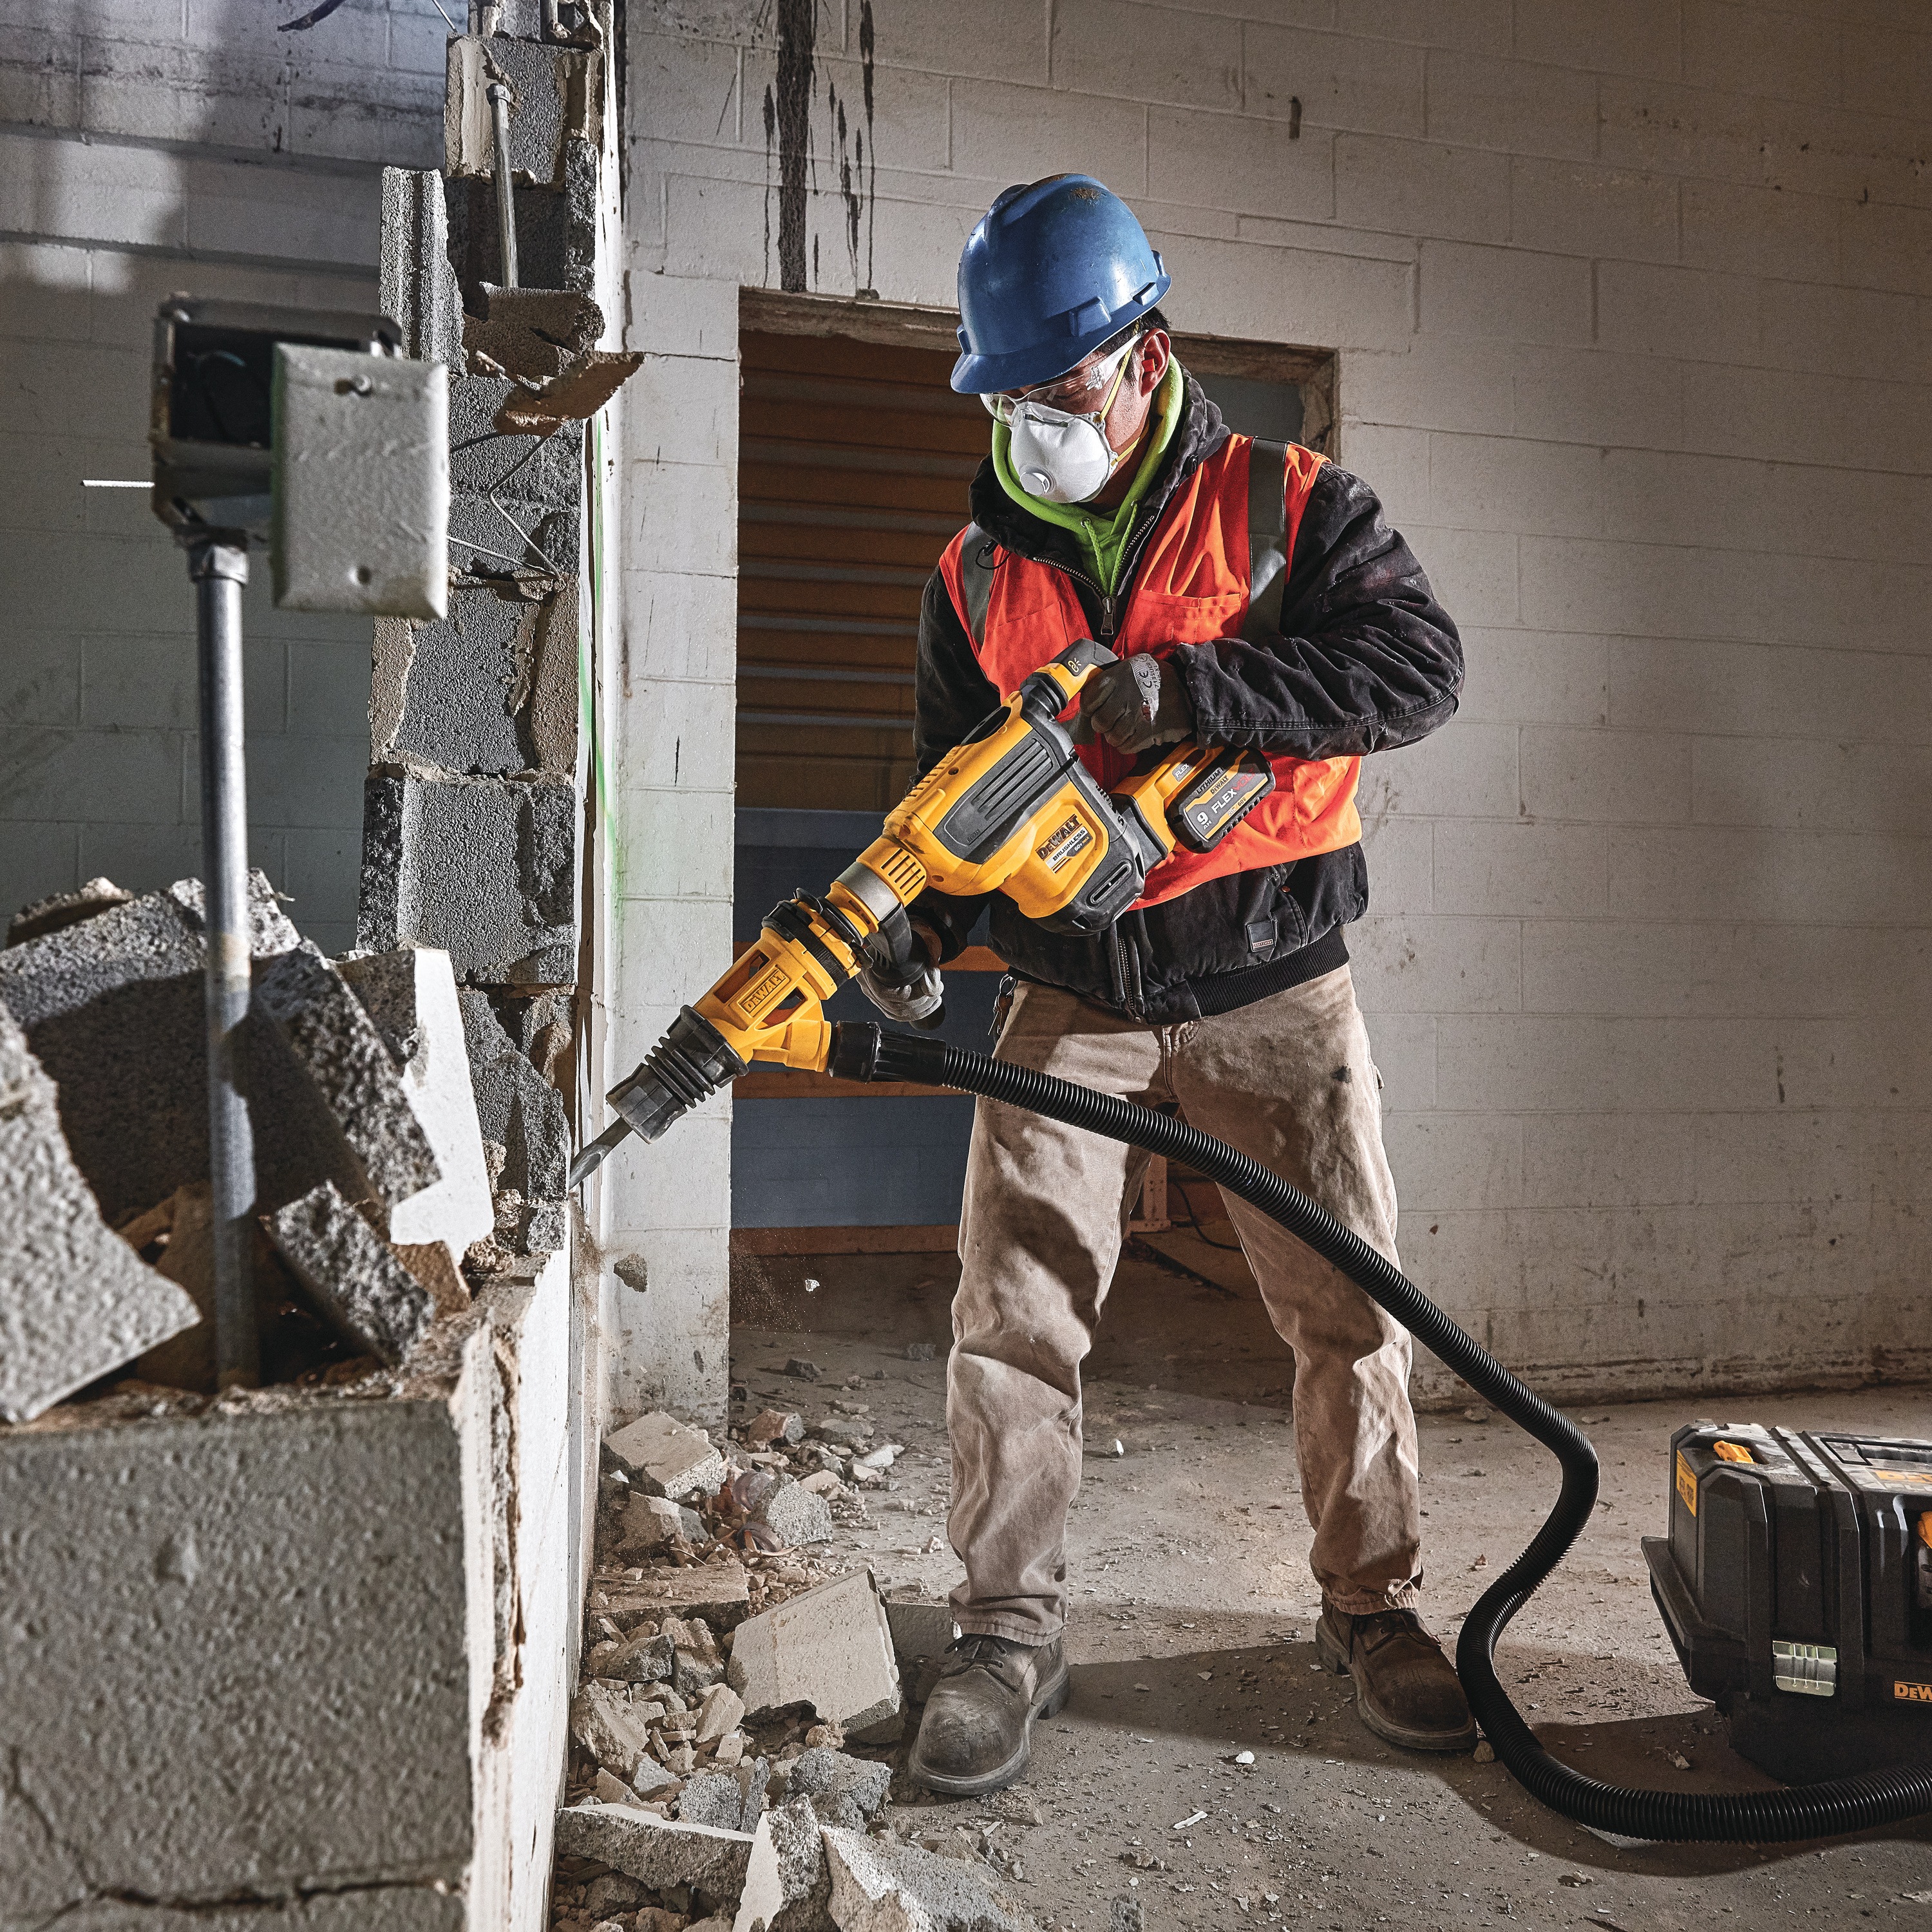 Dust Extractor being used by a workman.